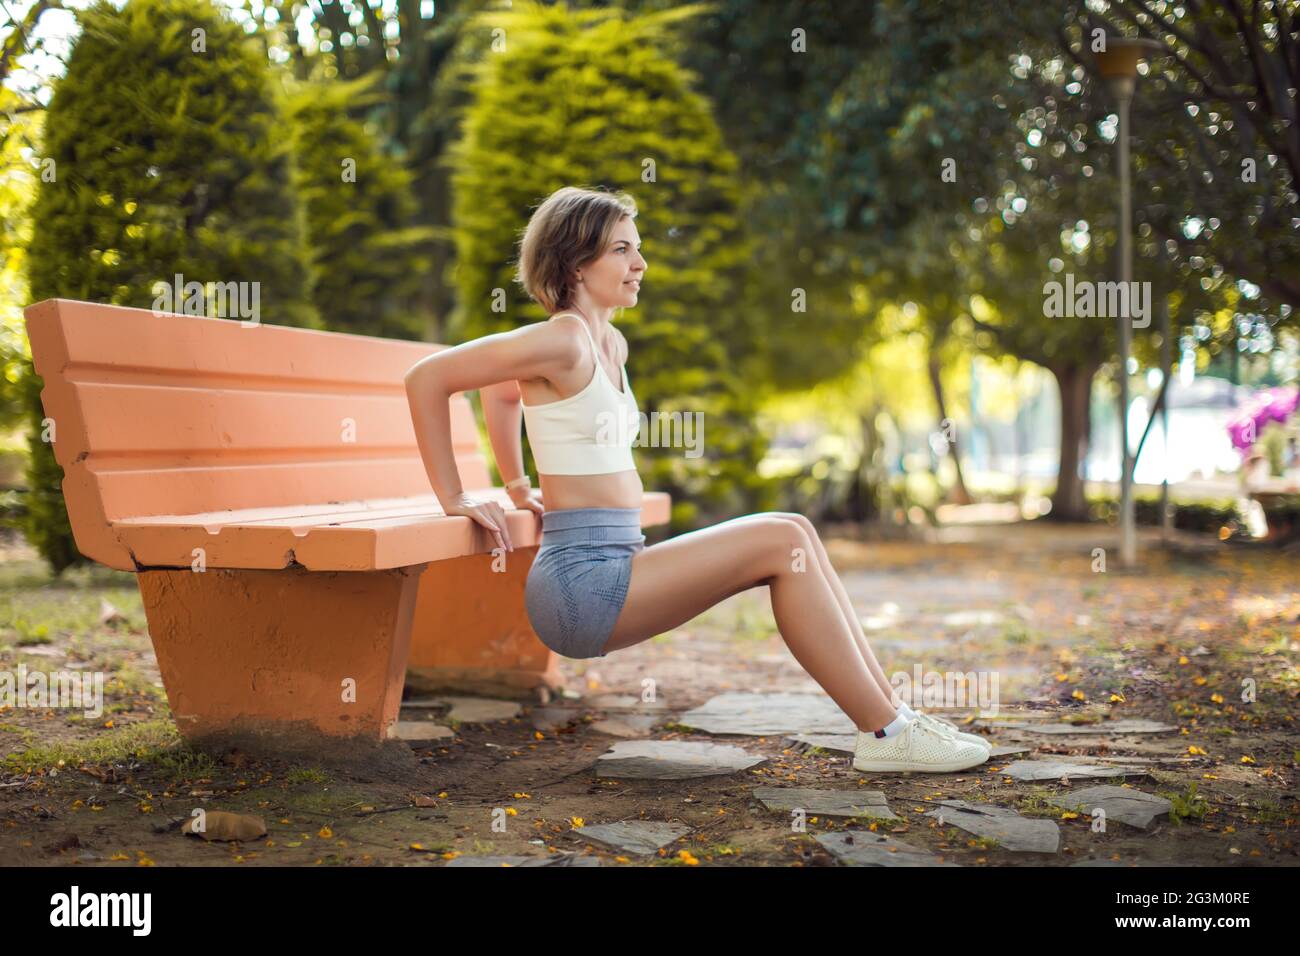 Exercise on the bench. Woman training in the park. Fitness and healthcare concept Stock Photo